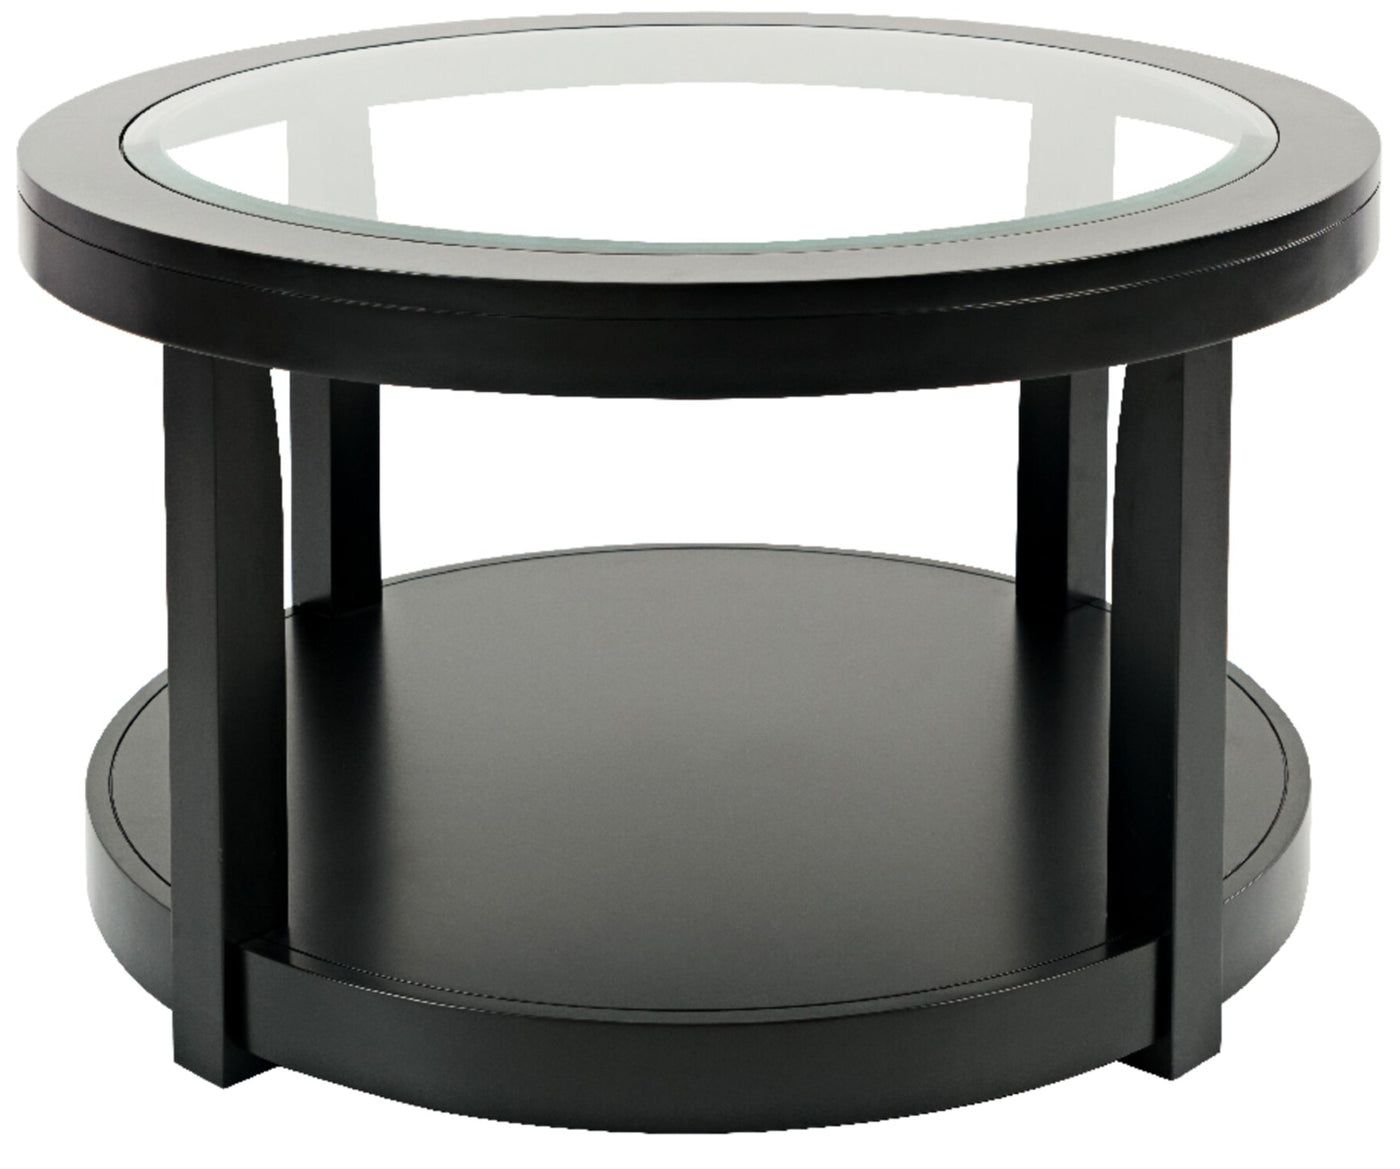 Corey Round Coffee Table – Black | The Brick With Full Black Round Coffee Tables (View 13 of 20)